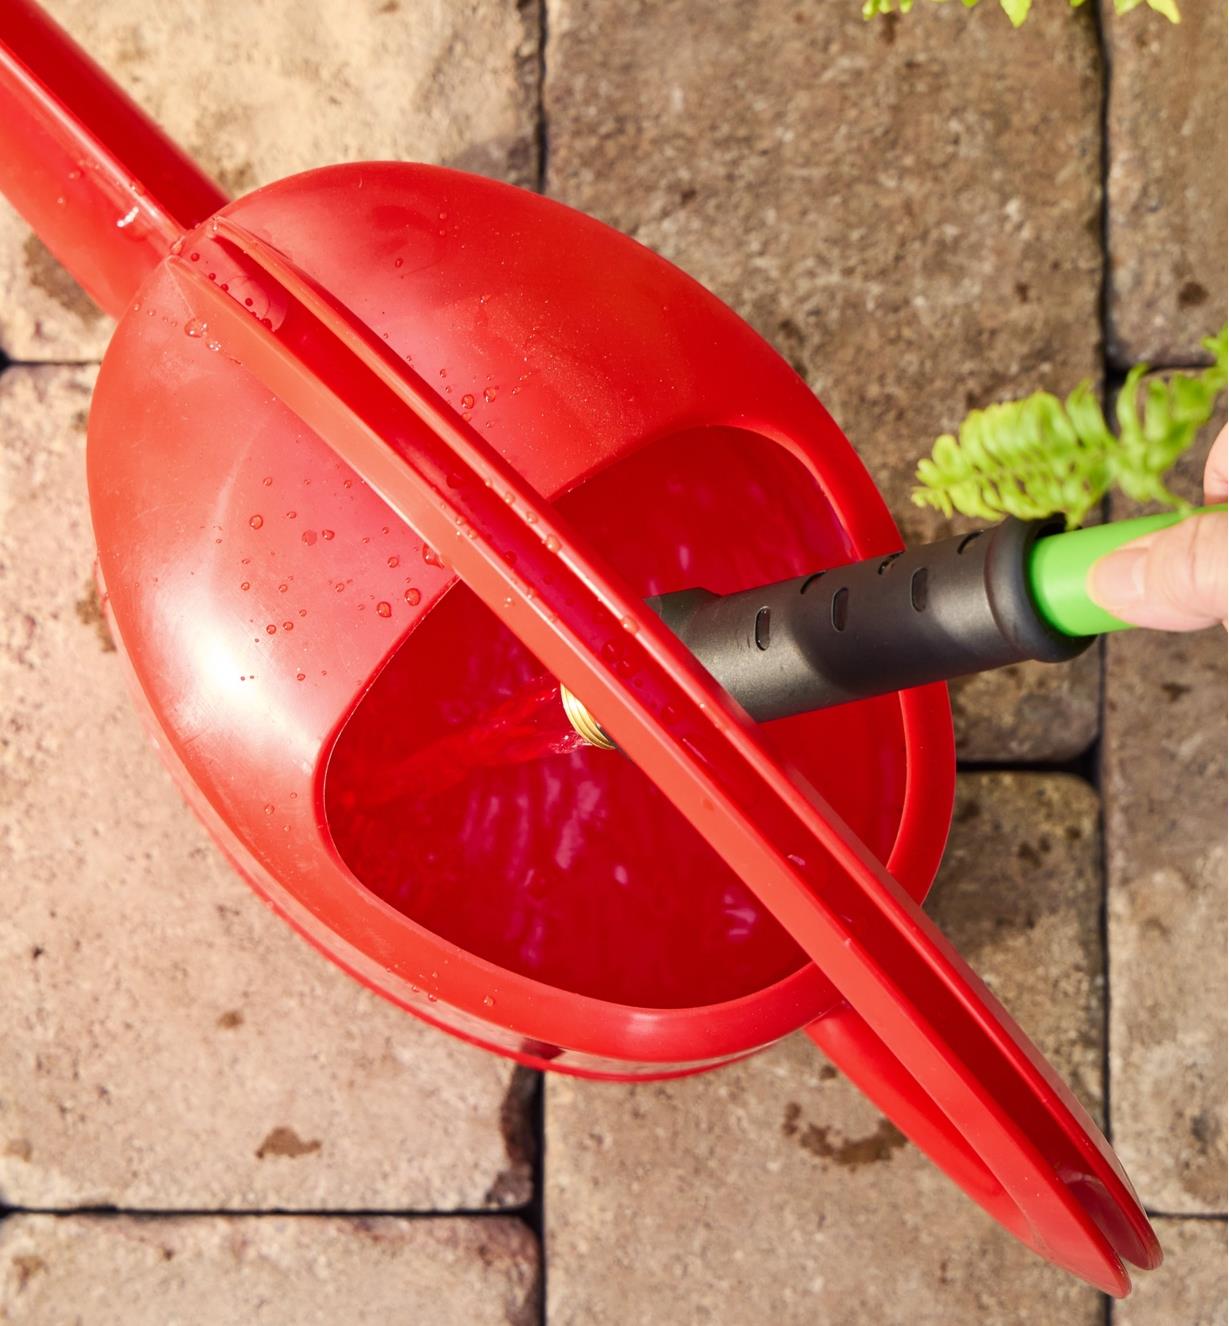 Filling a 5 litre watering can using a hose